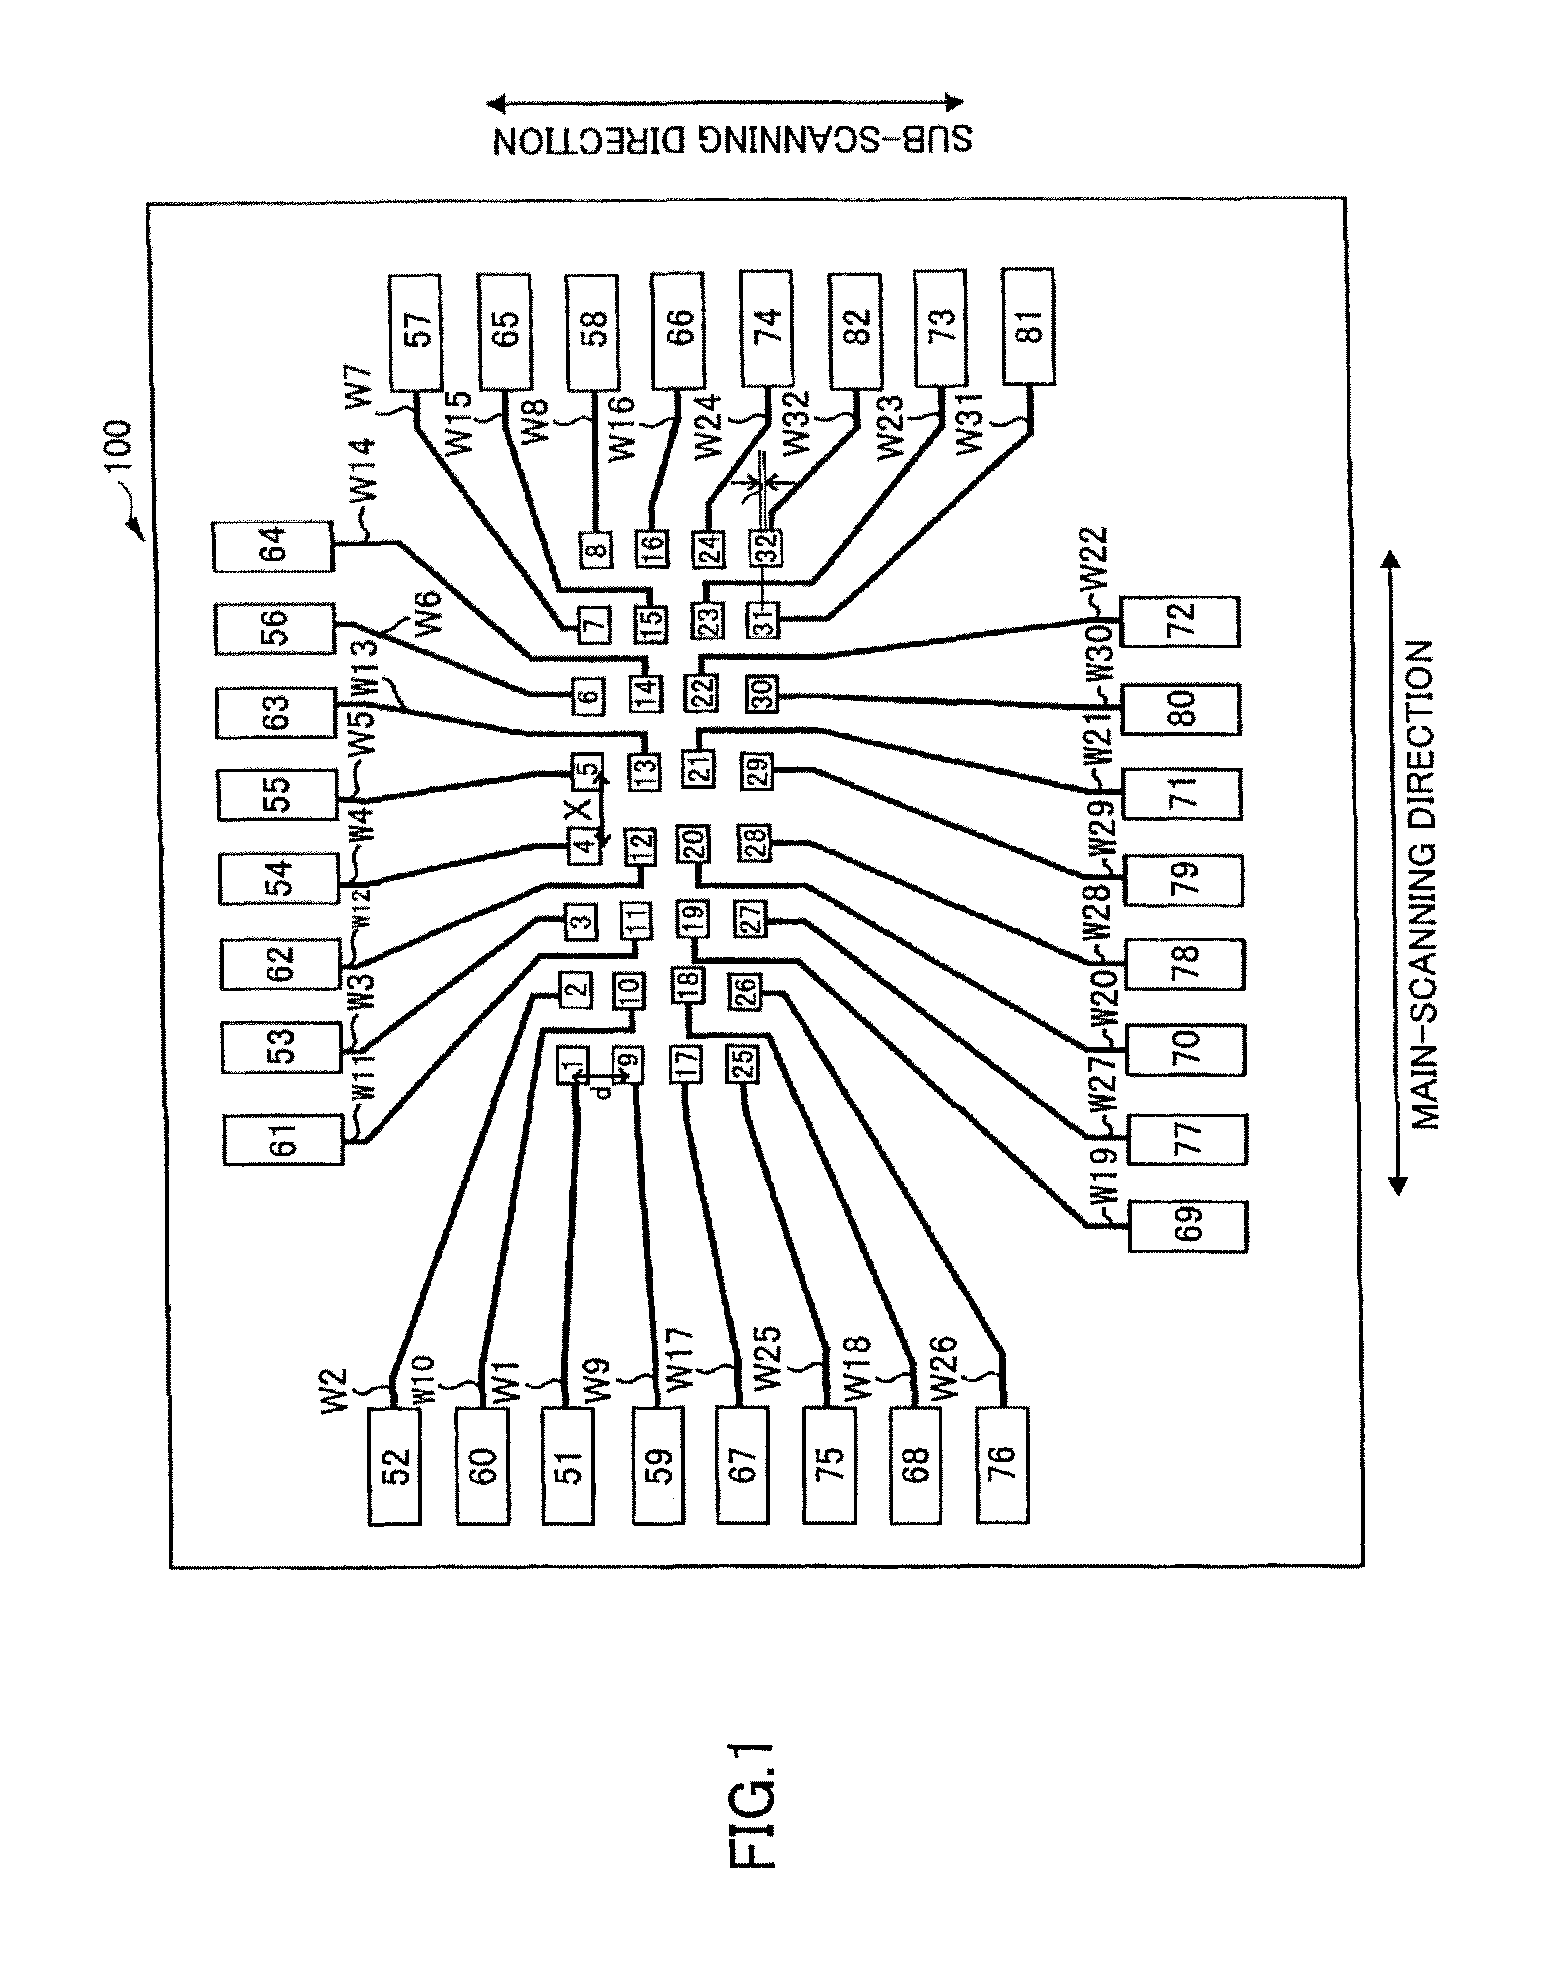 Surface-emitting laser array, optical scanning device, and image forming device